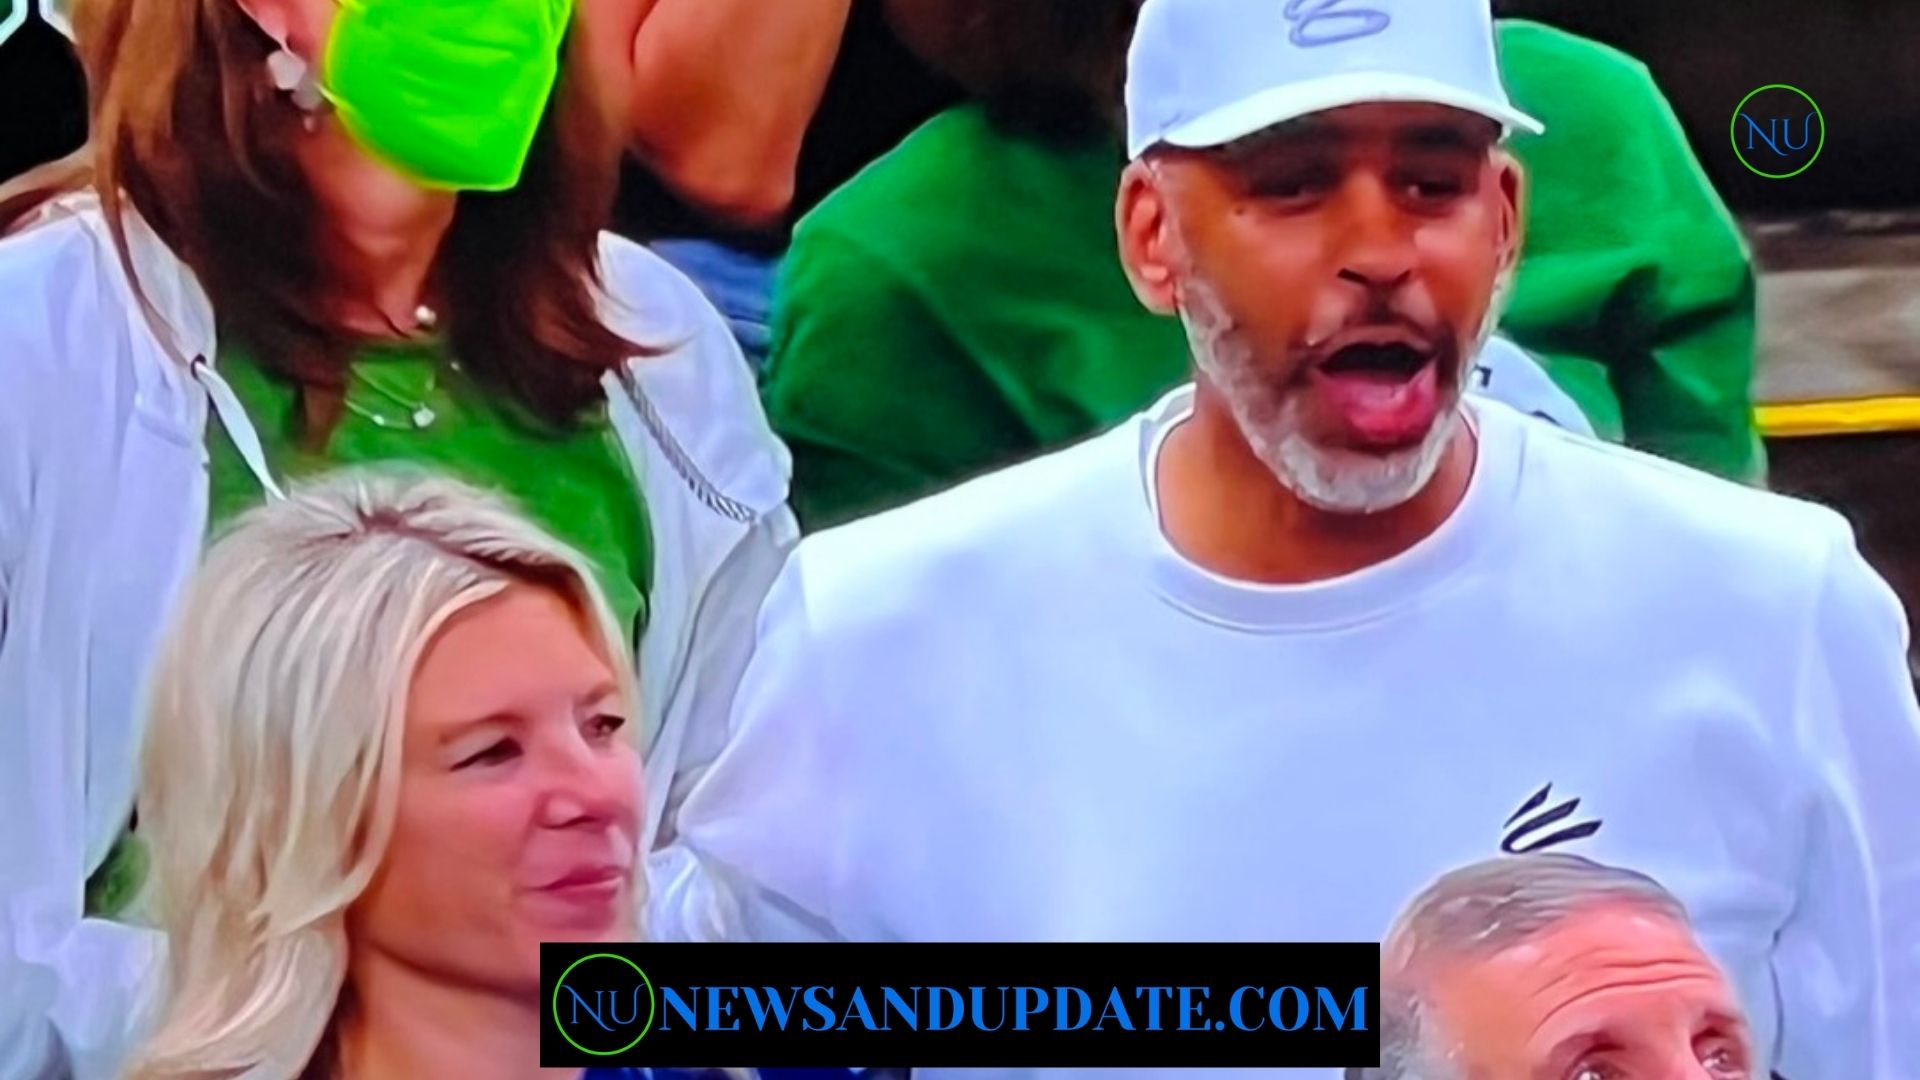 Dell Curry's New Girlfriend: Fans Unhappy With His Rumored New Girlfriend